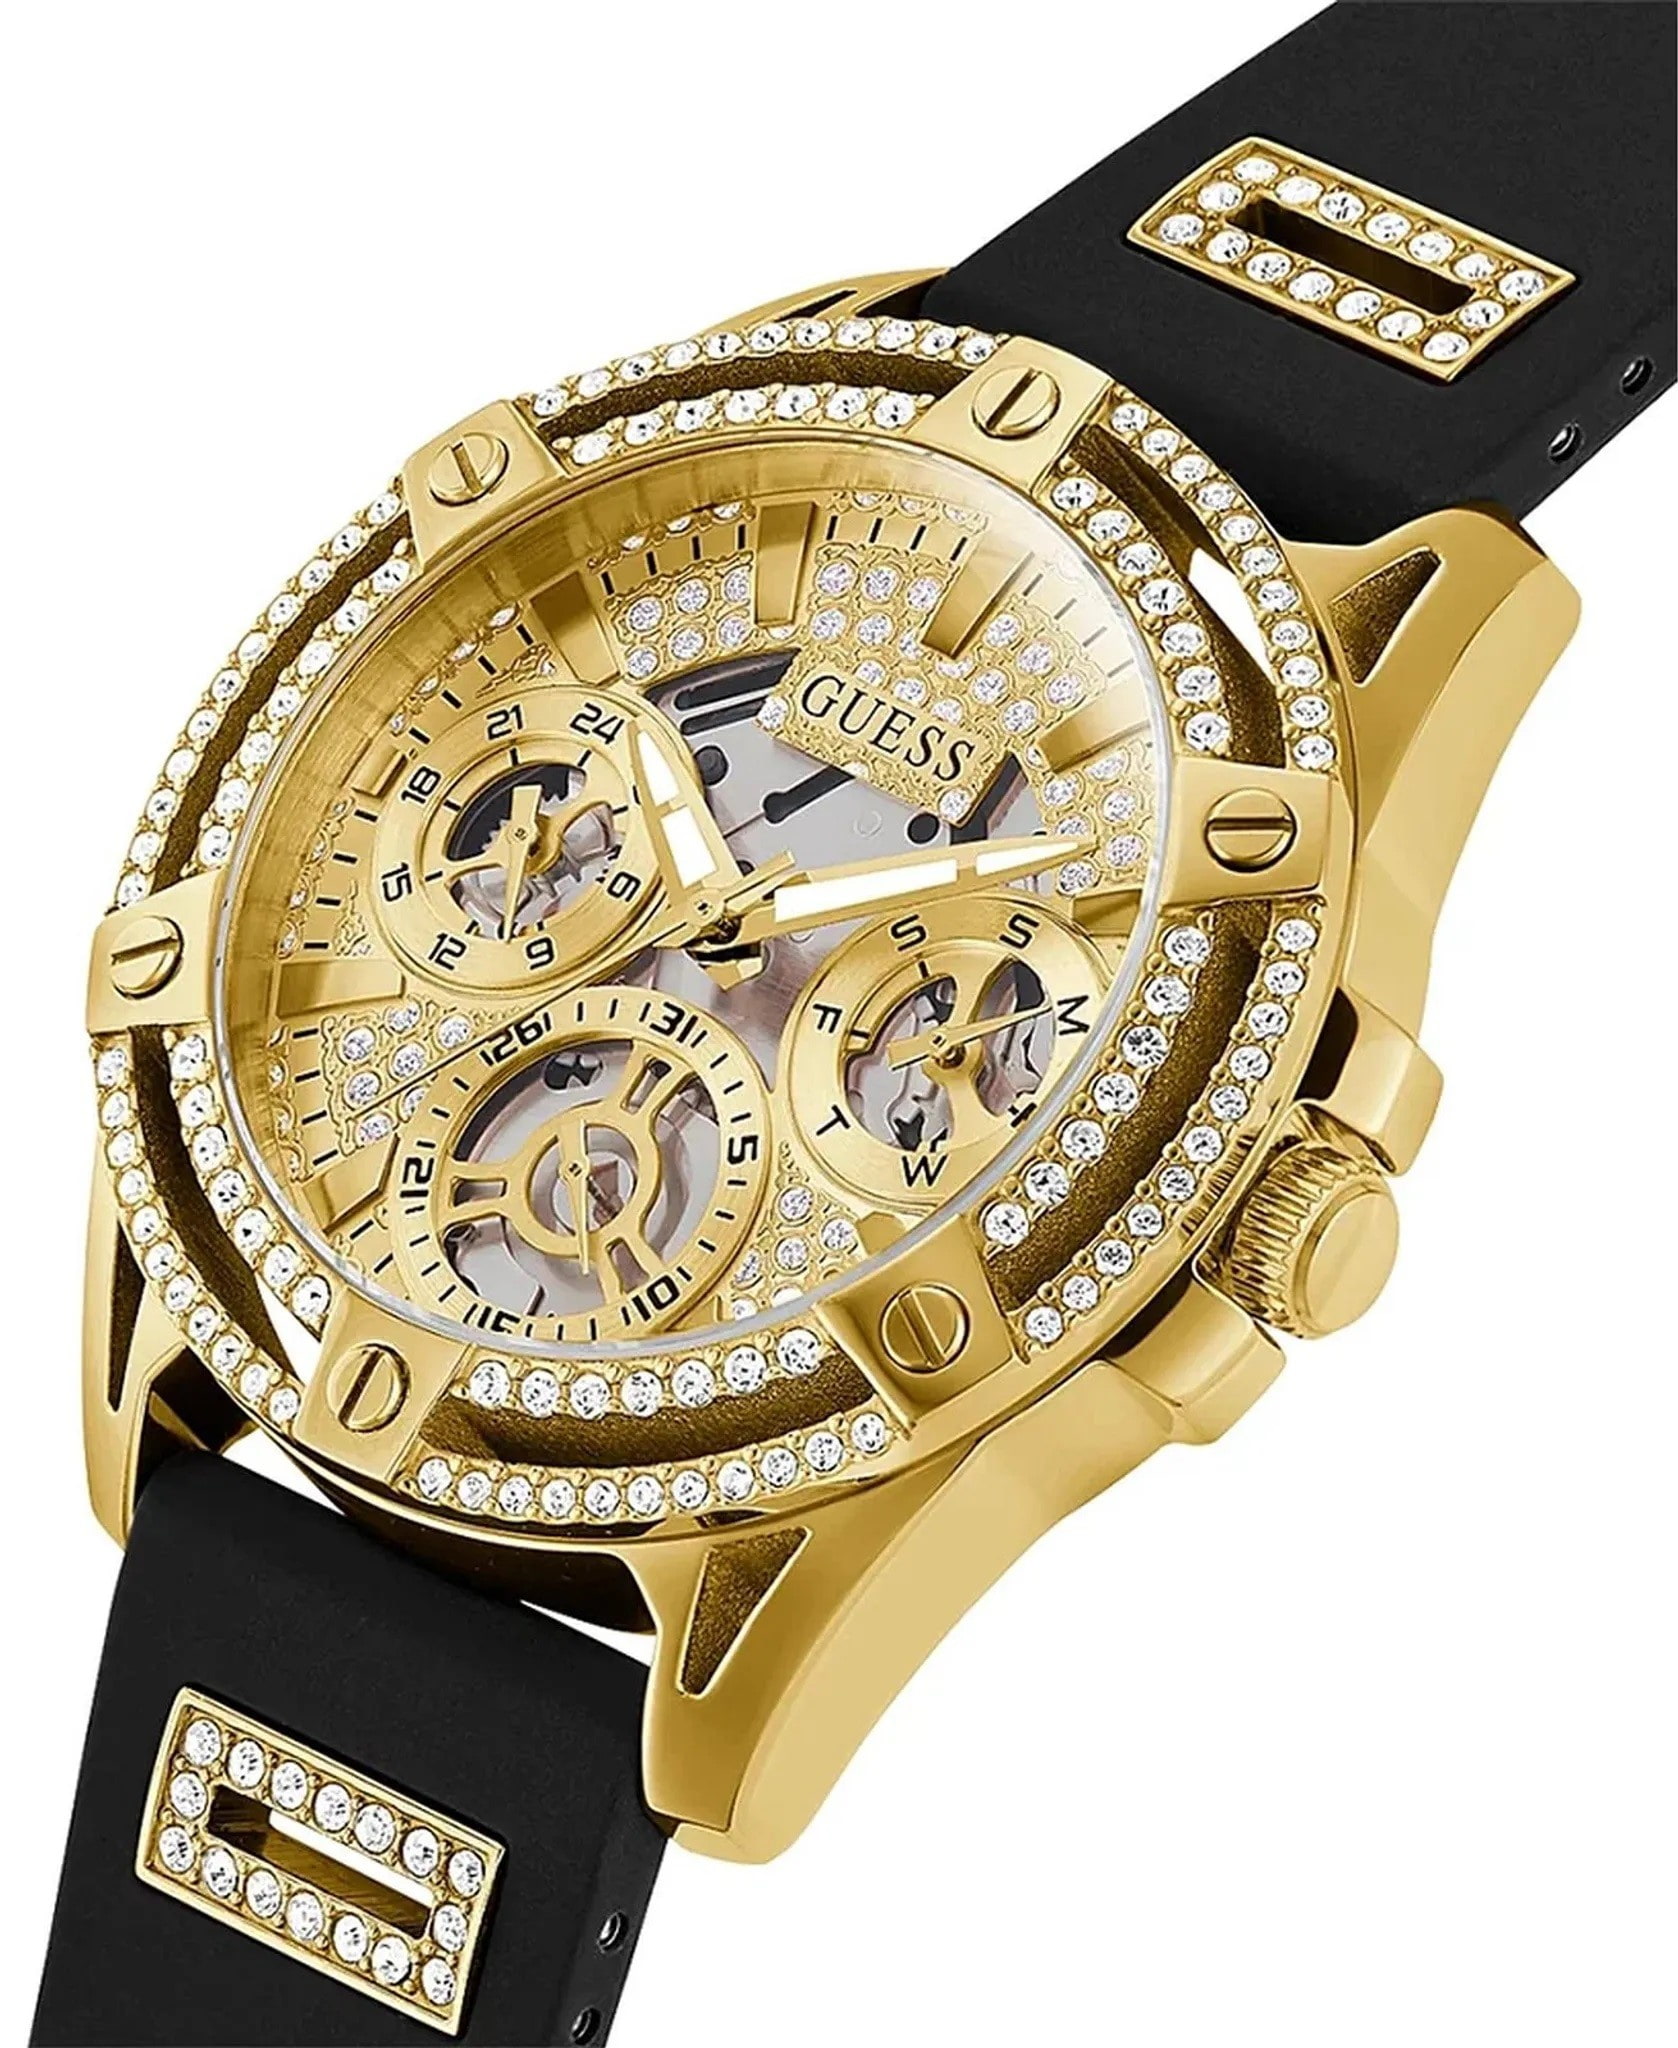 ĐỒNG HỒ GUESS GOLD-TONE MULTI-FUNCTION BLACK SILICONE WATCH GW0536L3 14